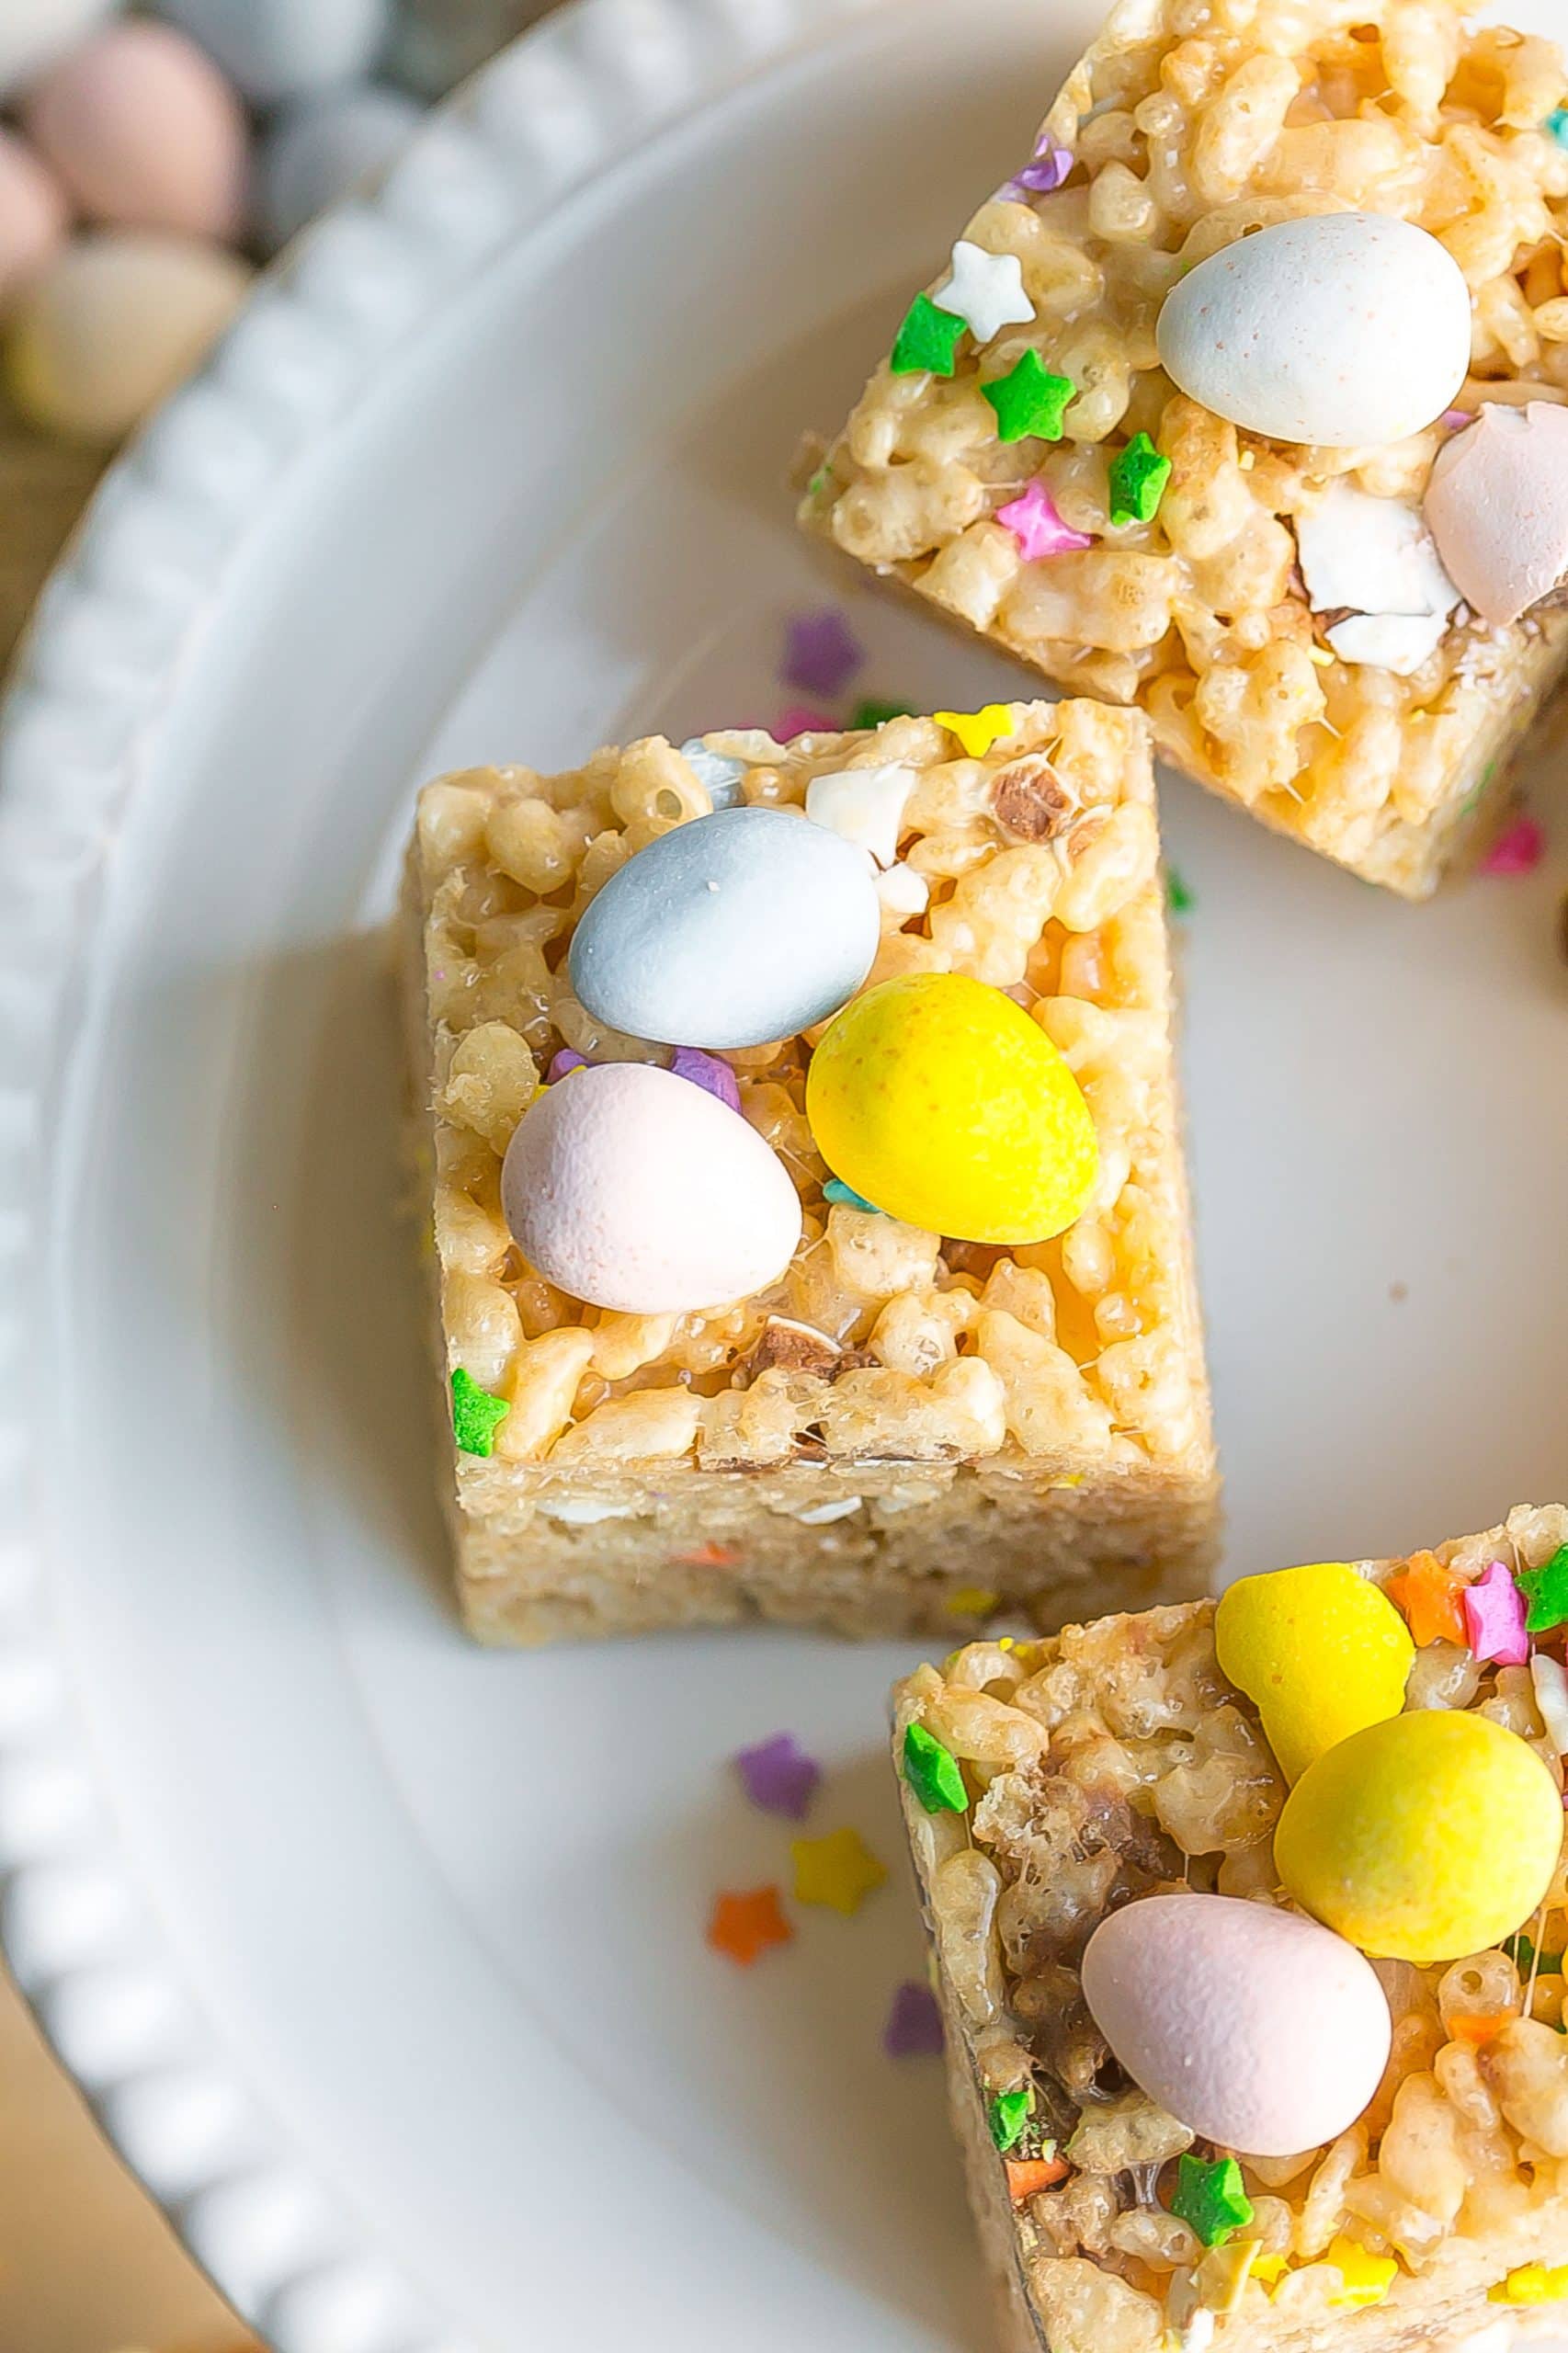 Birds eye view of rice krispie treats with chocolate egg candies on top.